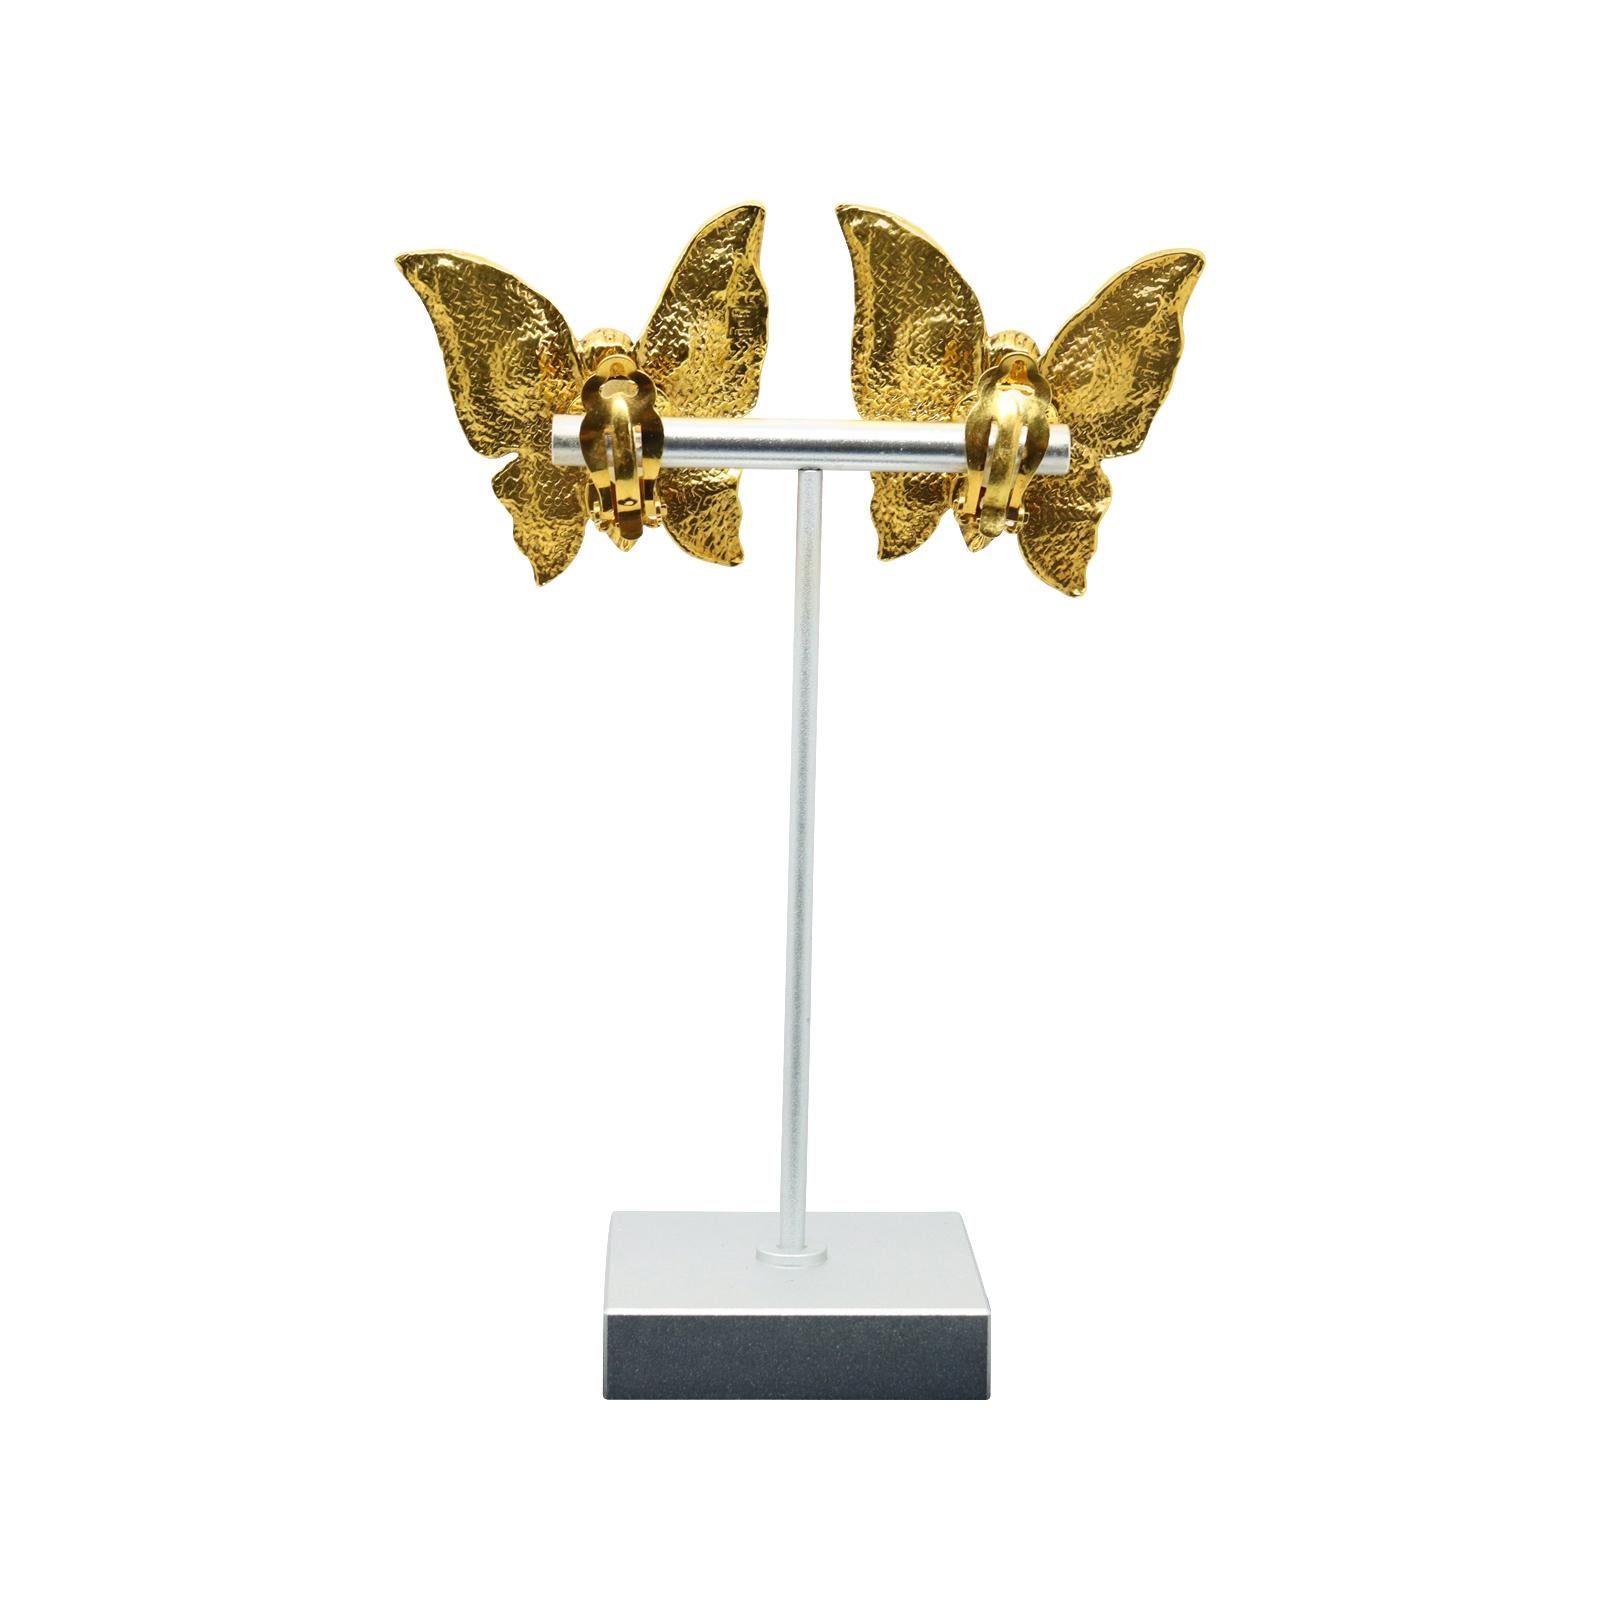 Vintage Yves Saint Laurent Rive Gauche YSL Butterfly Earrings Circa 1980s In Good Condition For Sale In New York, NY